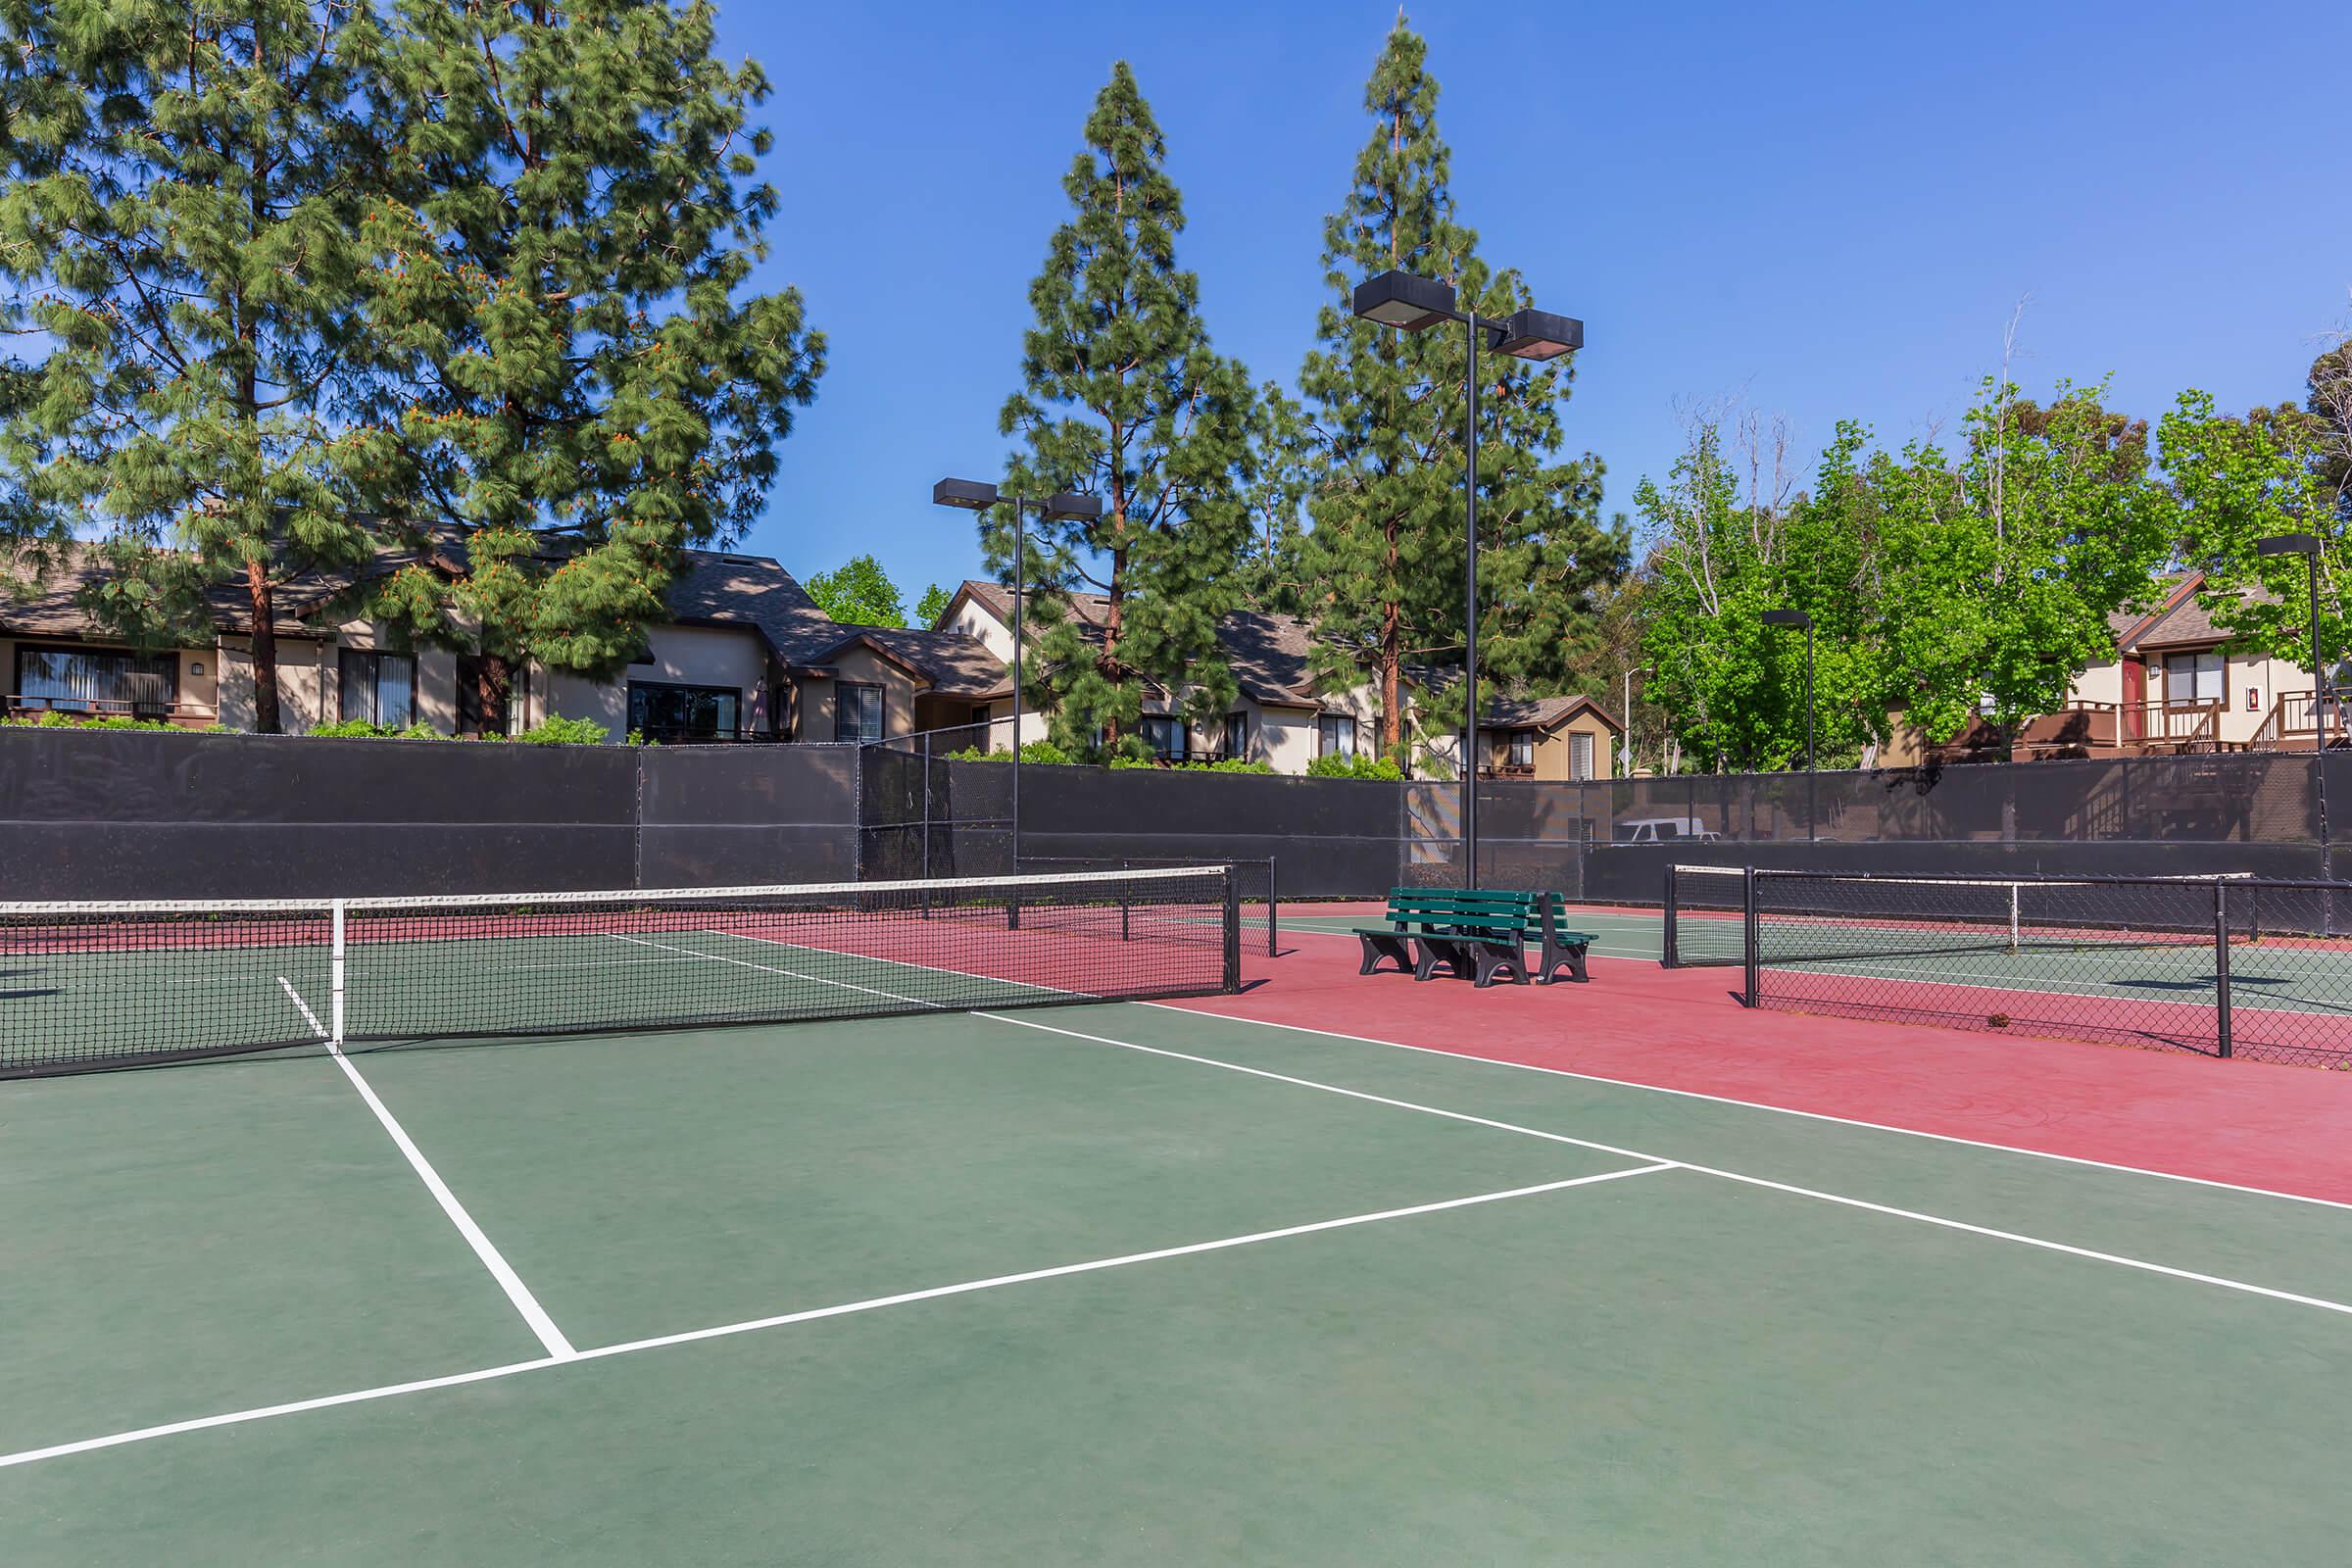 Emerald Court Apartment Homes tennis courts